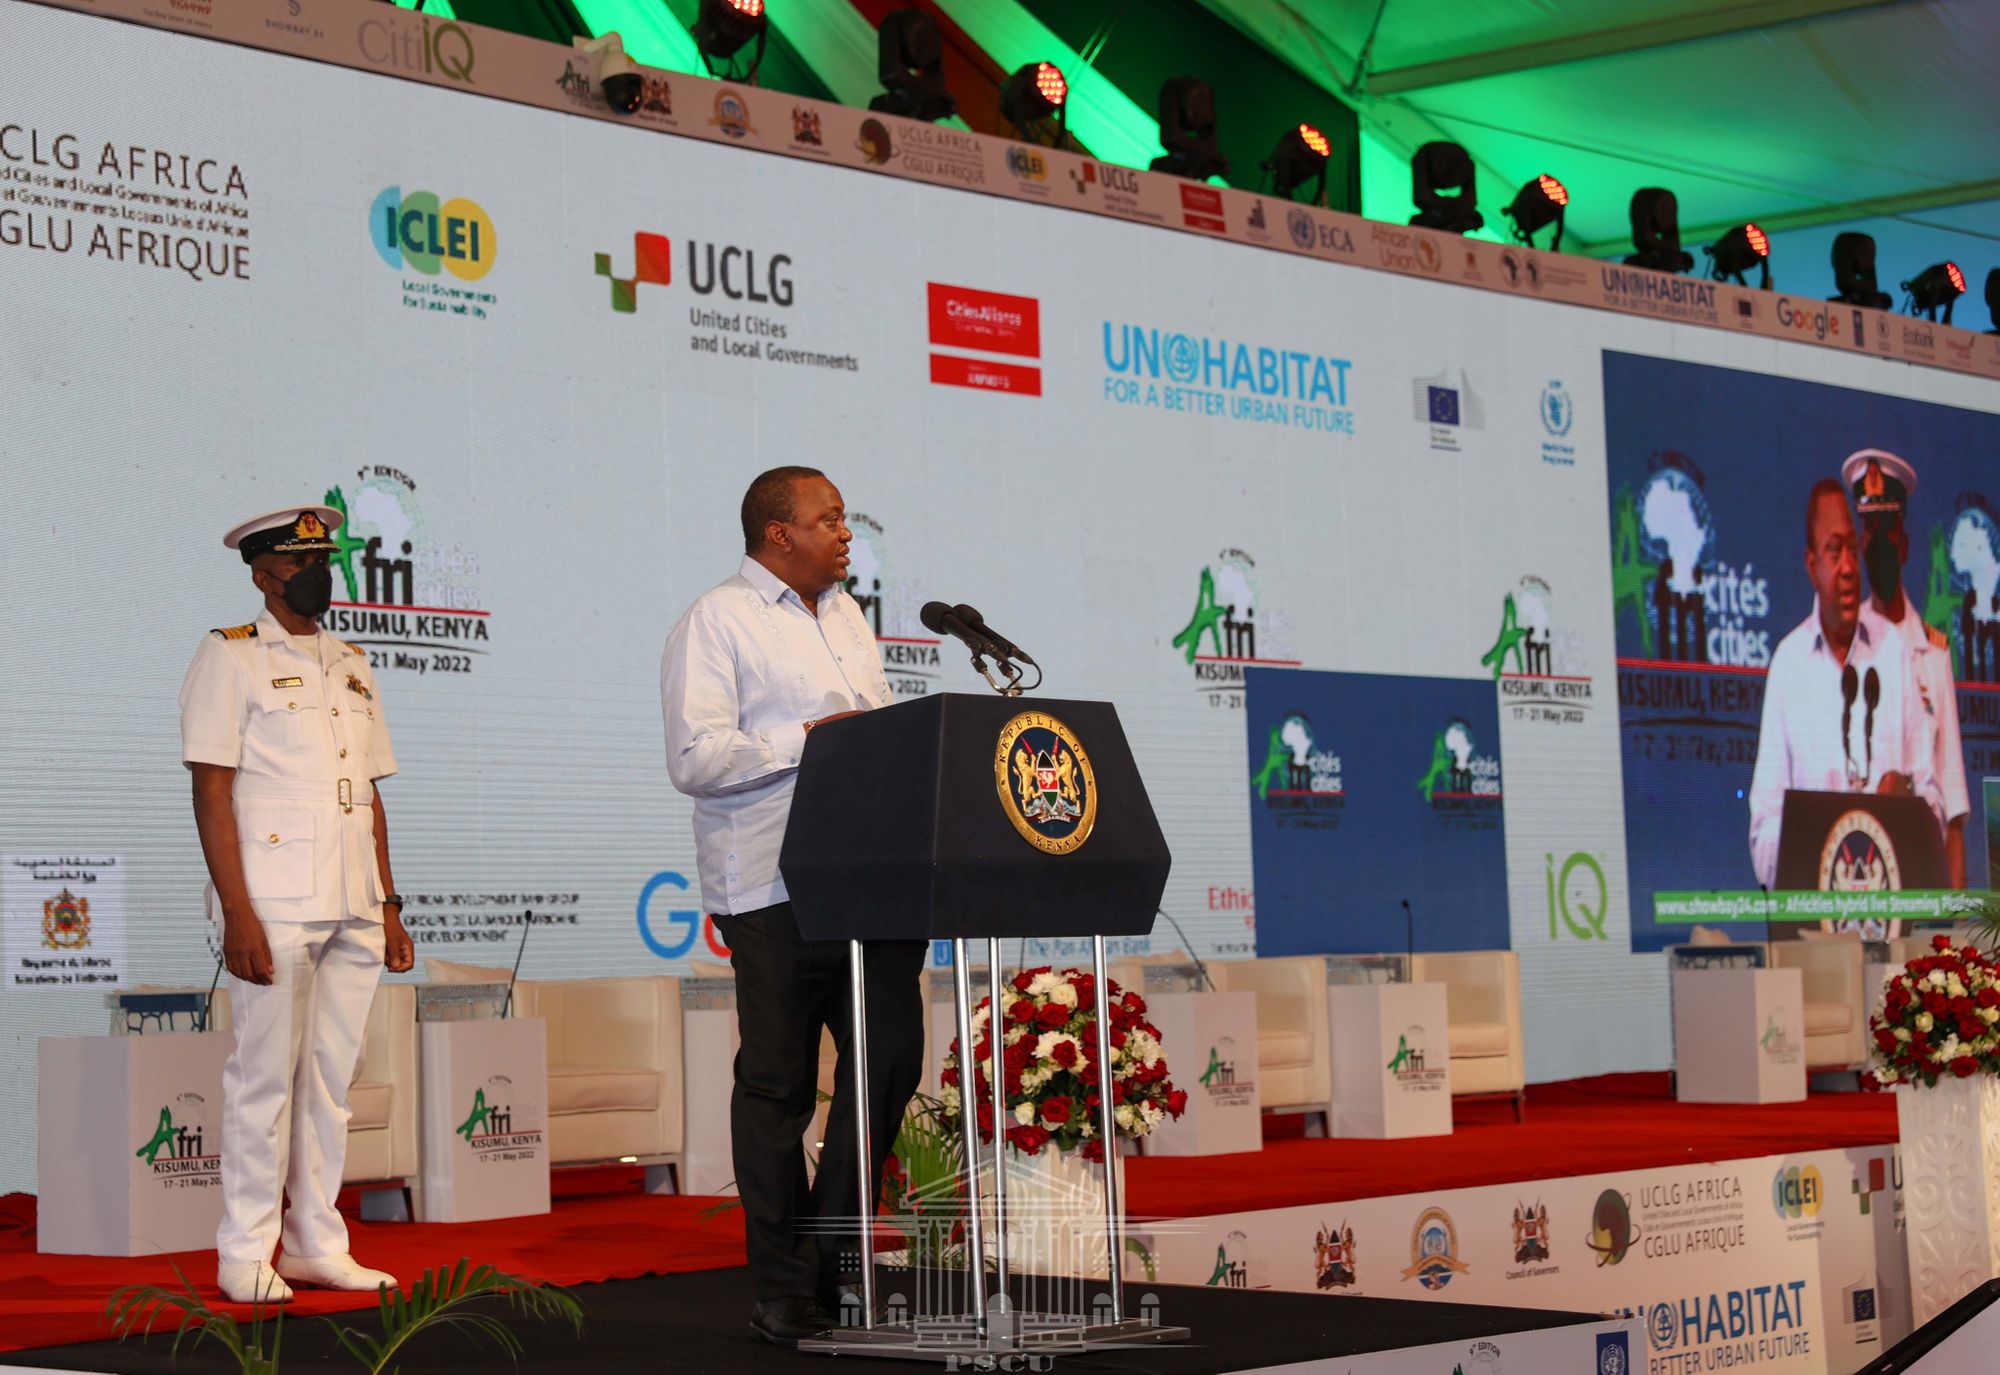 President Kenyatta launches Africities 9th edition